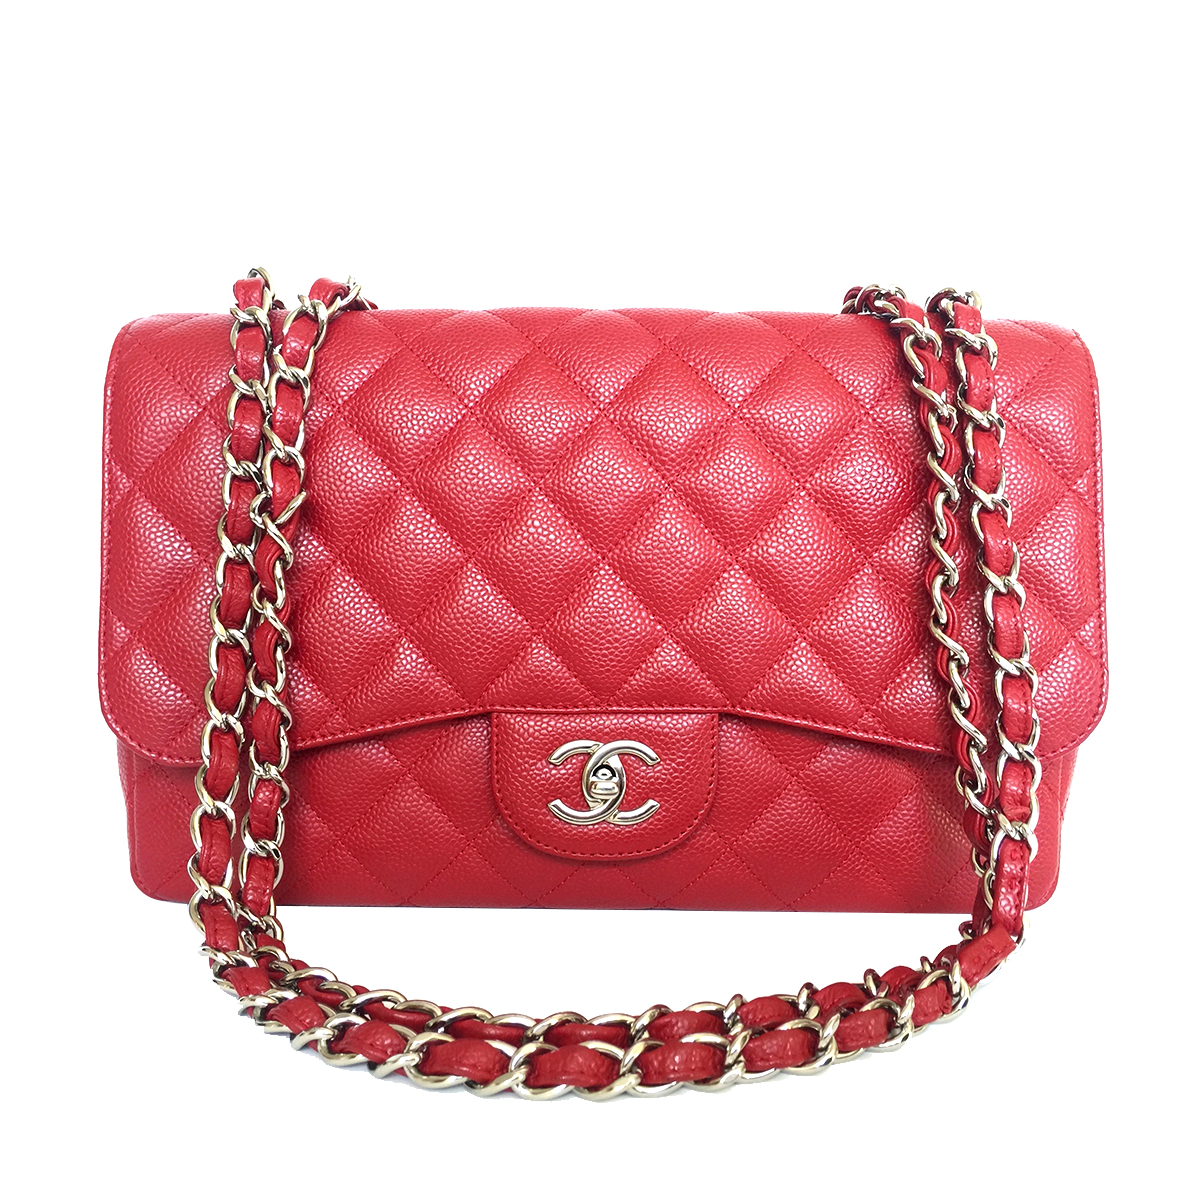 CHANEL Classic Jumbo Single Flap Red Caviar with Silver Hardware 2009